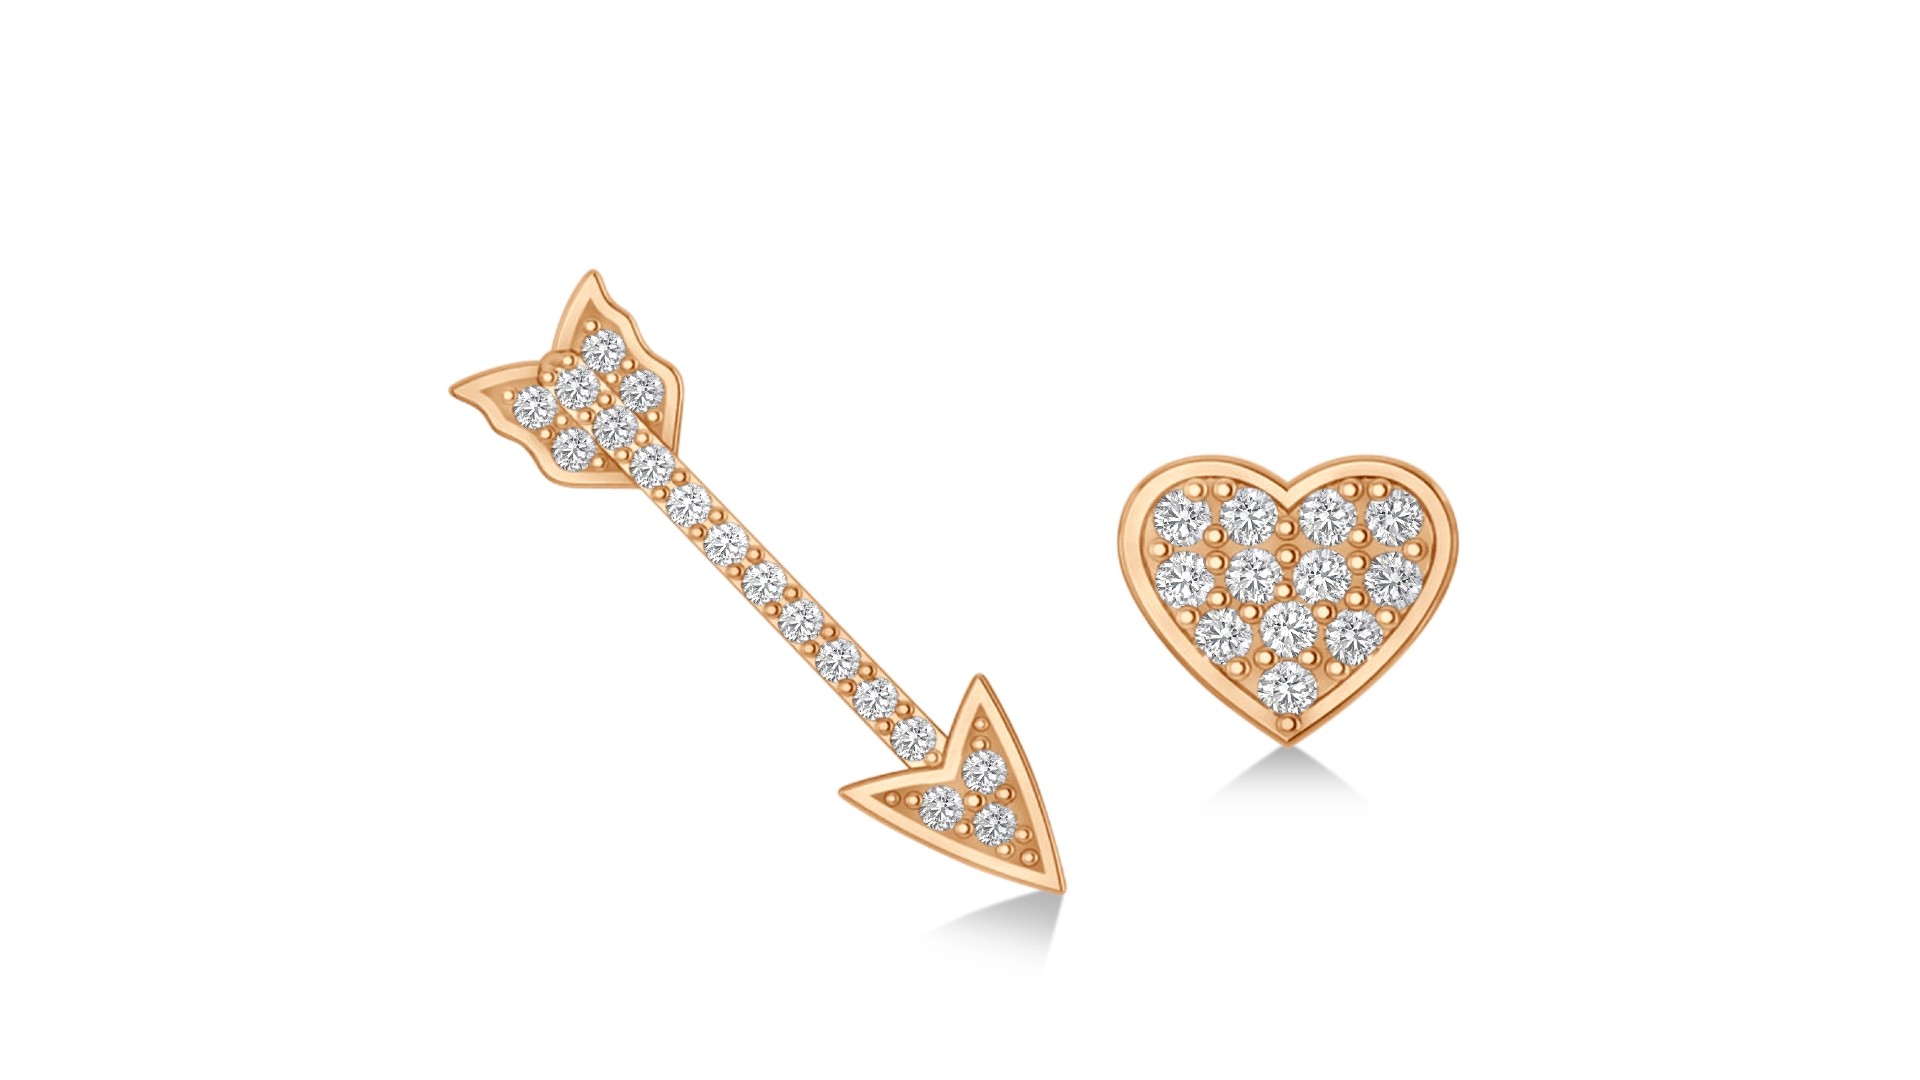 Valentine’s Day Gift Guide: a set of Heart & Arrow Mismatched Earrings